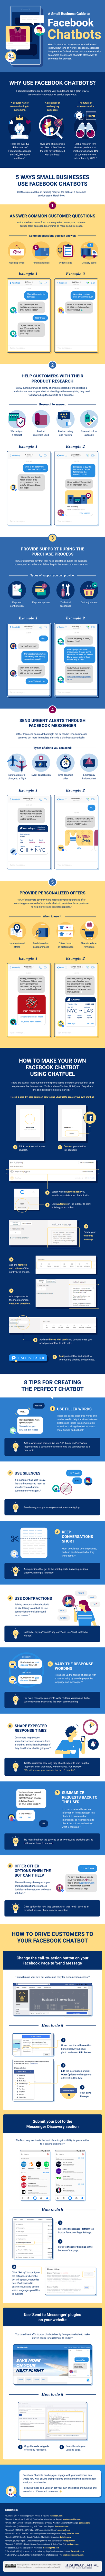 A Small Business Guide to Facebook Chatbots - infographic | Facebook chatbots are becoming an increasingly popular way to automate communication with customers.  In fact, research predicts that chatbots will power 85 percent of customer service interactions by 2020, while 80 percent of businesses say they currently use or are planning to use chatbots.  With no need for new hires or tons of work, here's a step-by-step infographic-guide to Facebook chatbots.